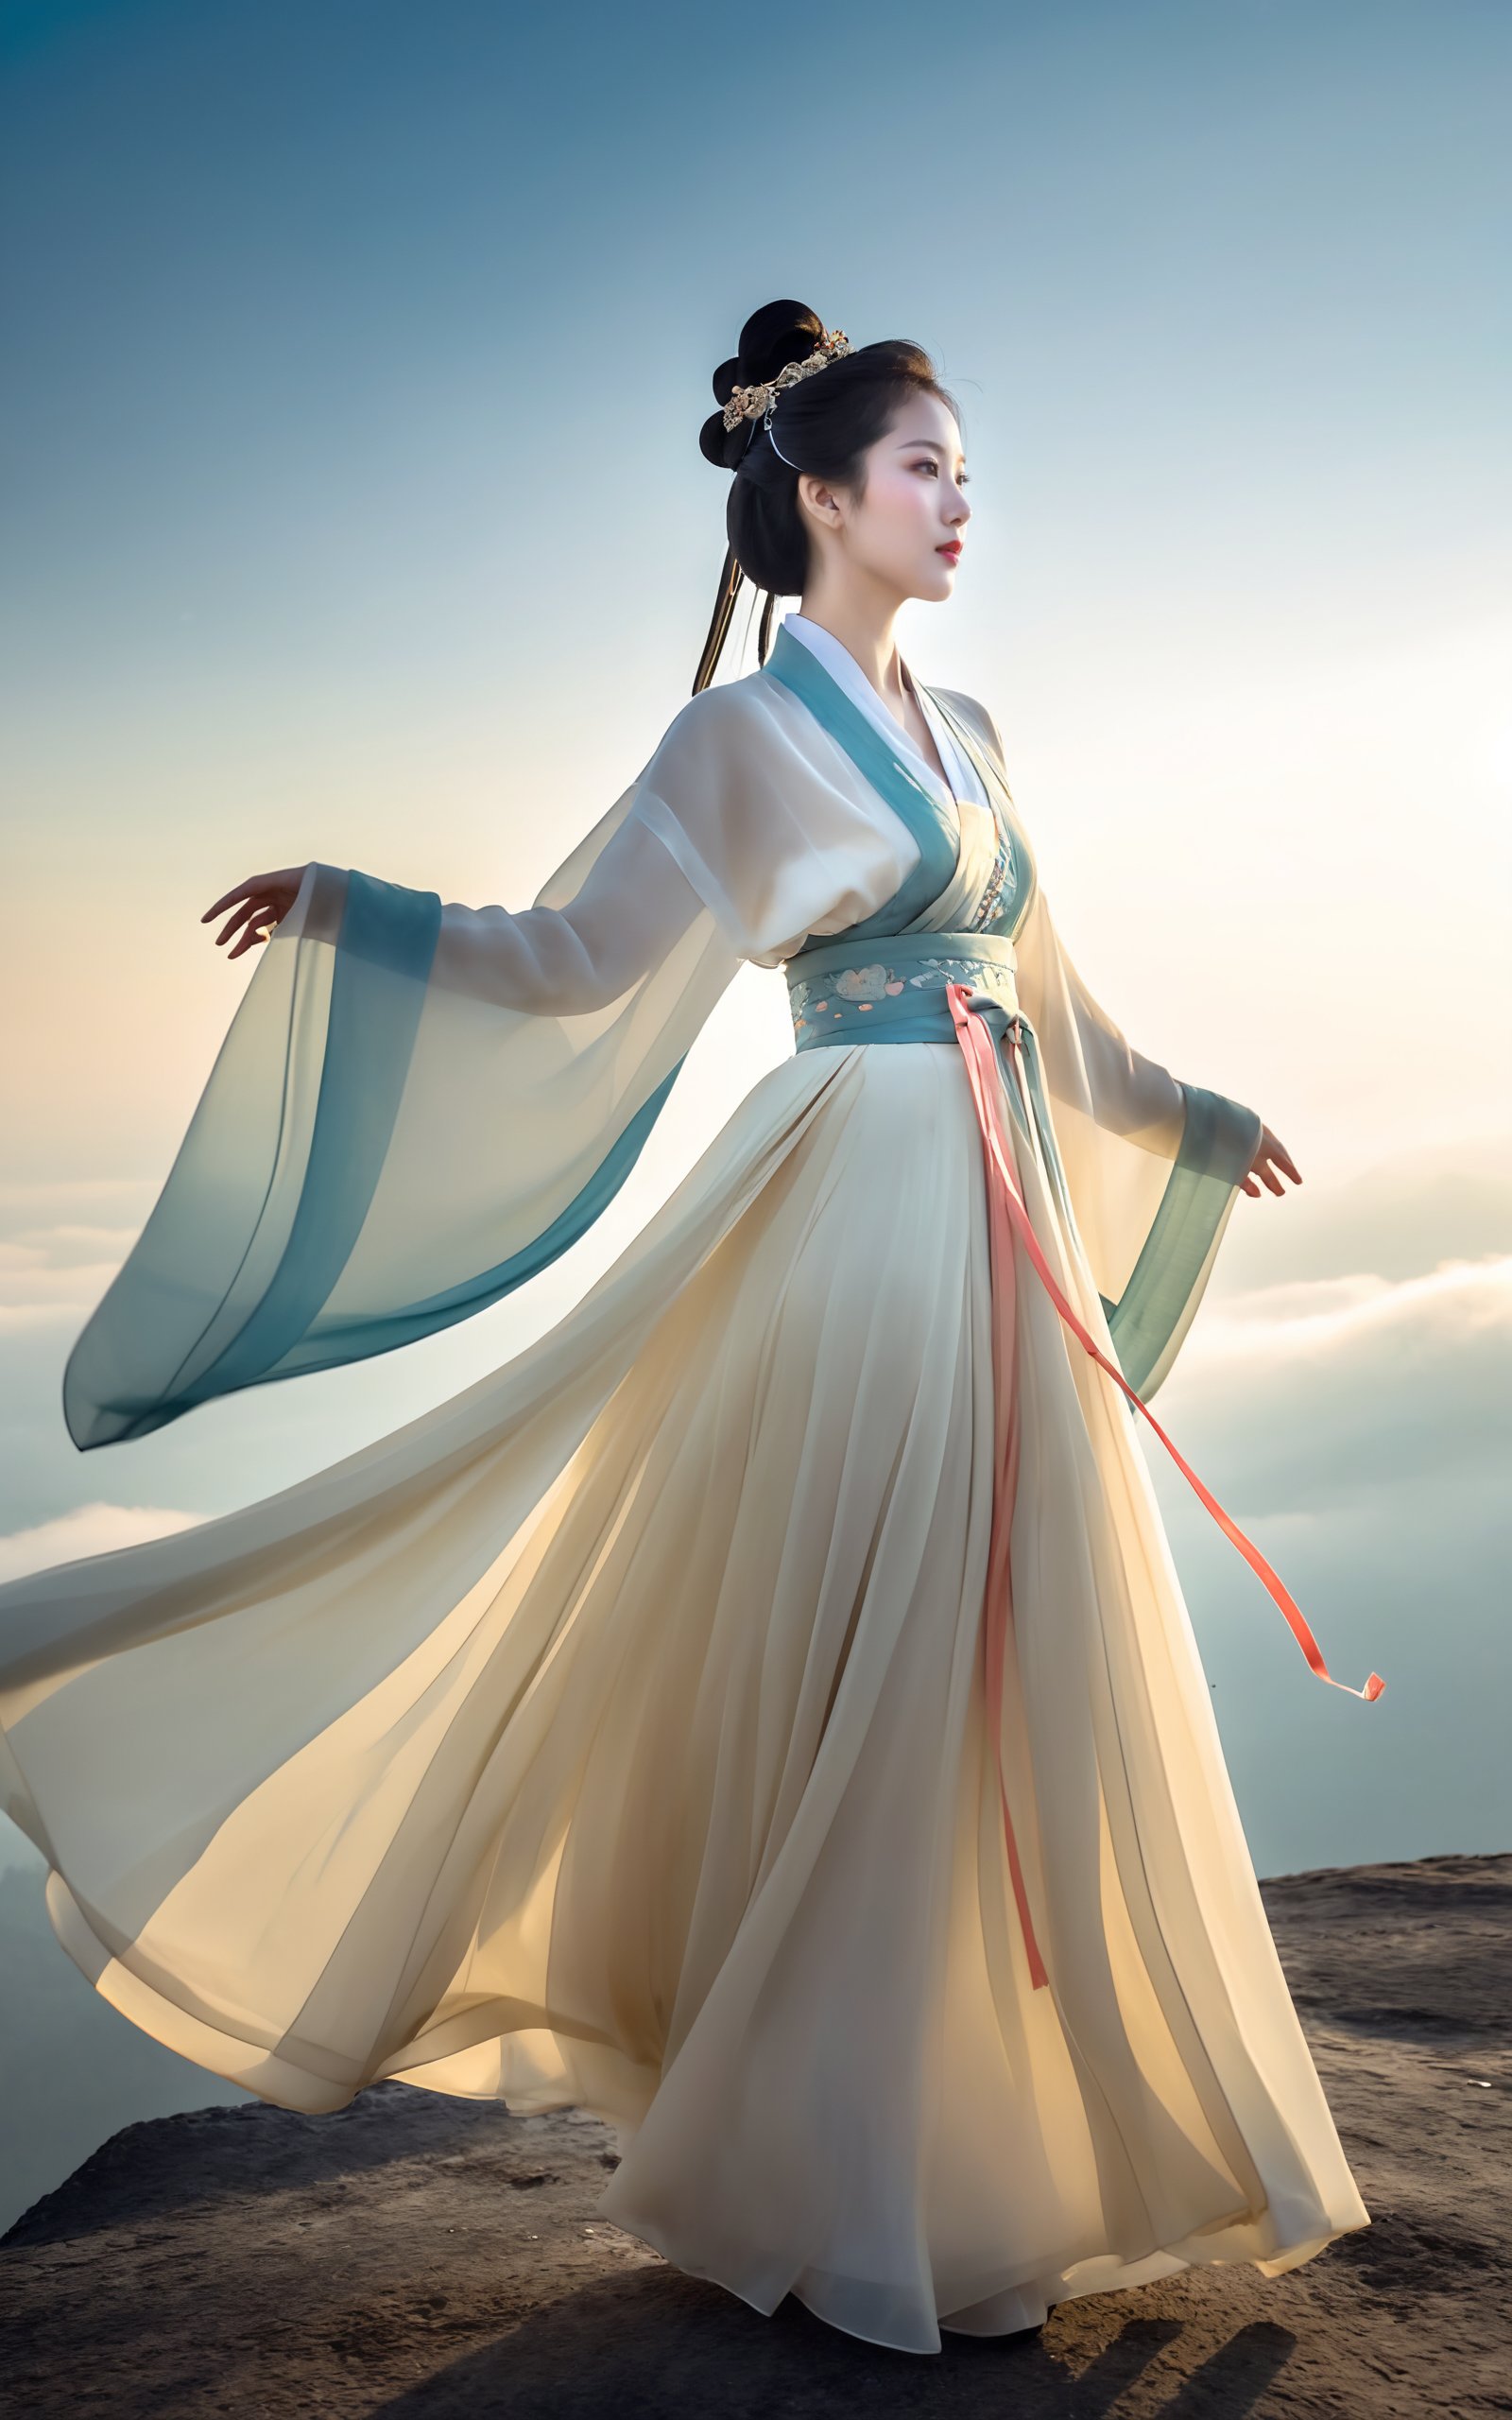 hyperdetailed photograph,a time-traveling woman,chinese,shanghai,((wormhole)),1770s era,costume dress,eerie atmosphere,faded picture,overexposed,ambient lit fog,super sharp details,amateur photography,movement of light,long exposure,analog film,subsurface scattering,vignette,a young woman flies above the clouds,with colorful ribbons streaming from her attire,and the pipa in her arms plays a melodious tune. Sunlight filters through the clouds,casting a golden edge around her figure,her large,bright eyes gleaming with a passion for music. The flowing silhouette of the Hanfu accentuates her feminine curves,especially her full bosom and slender waist,adding an extra touch of elegance to her flight.,good hands,anatomical hands,perfect hands,